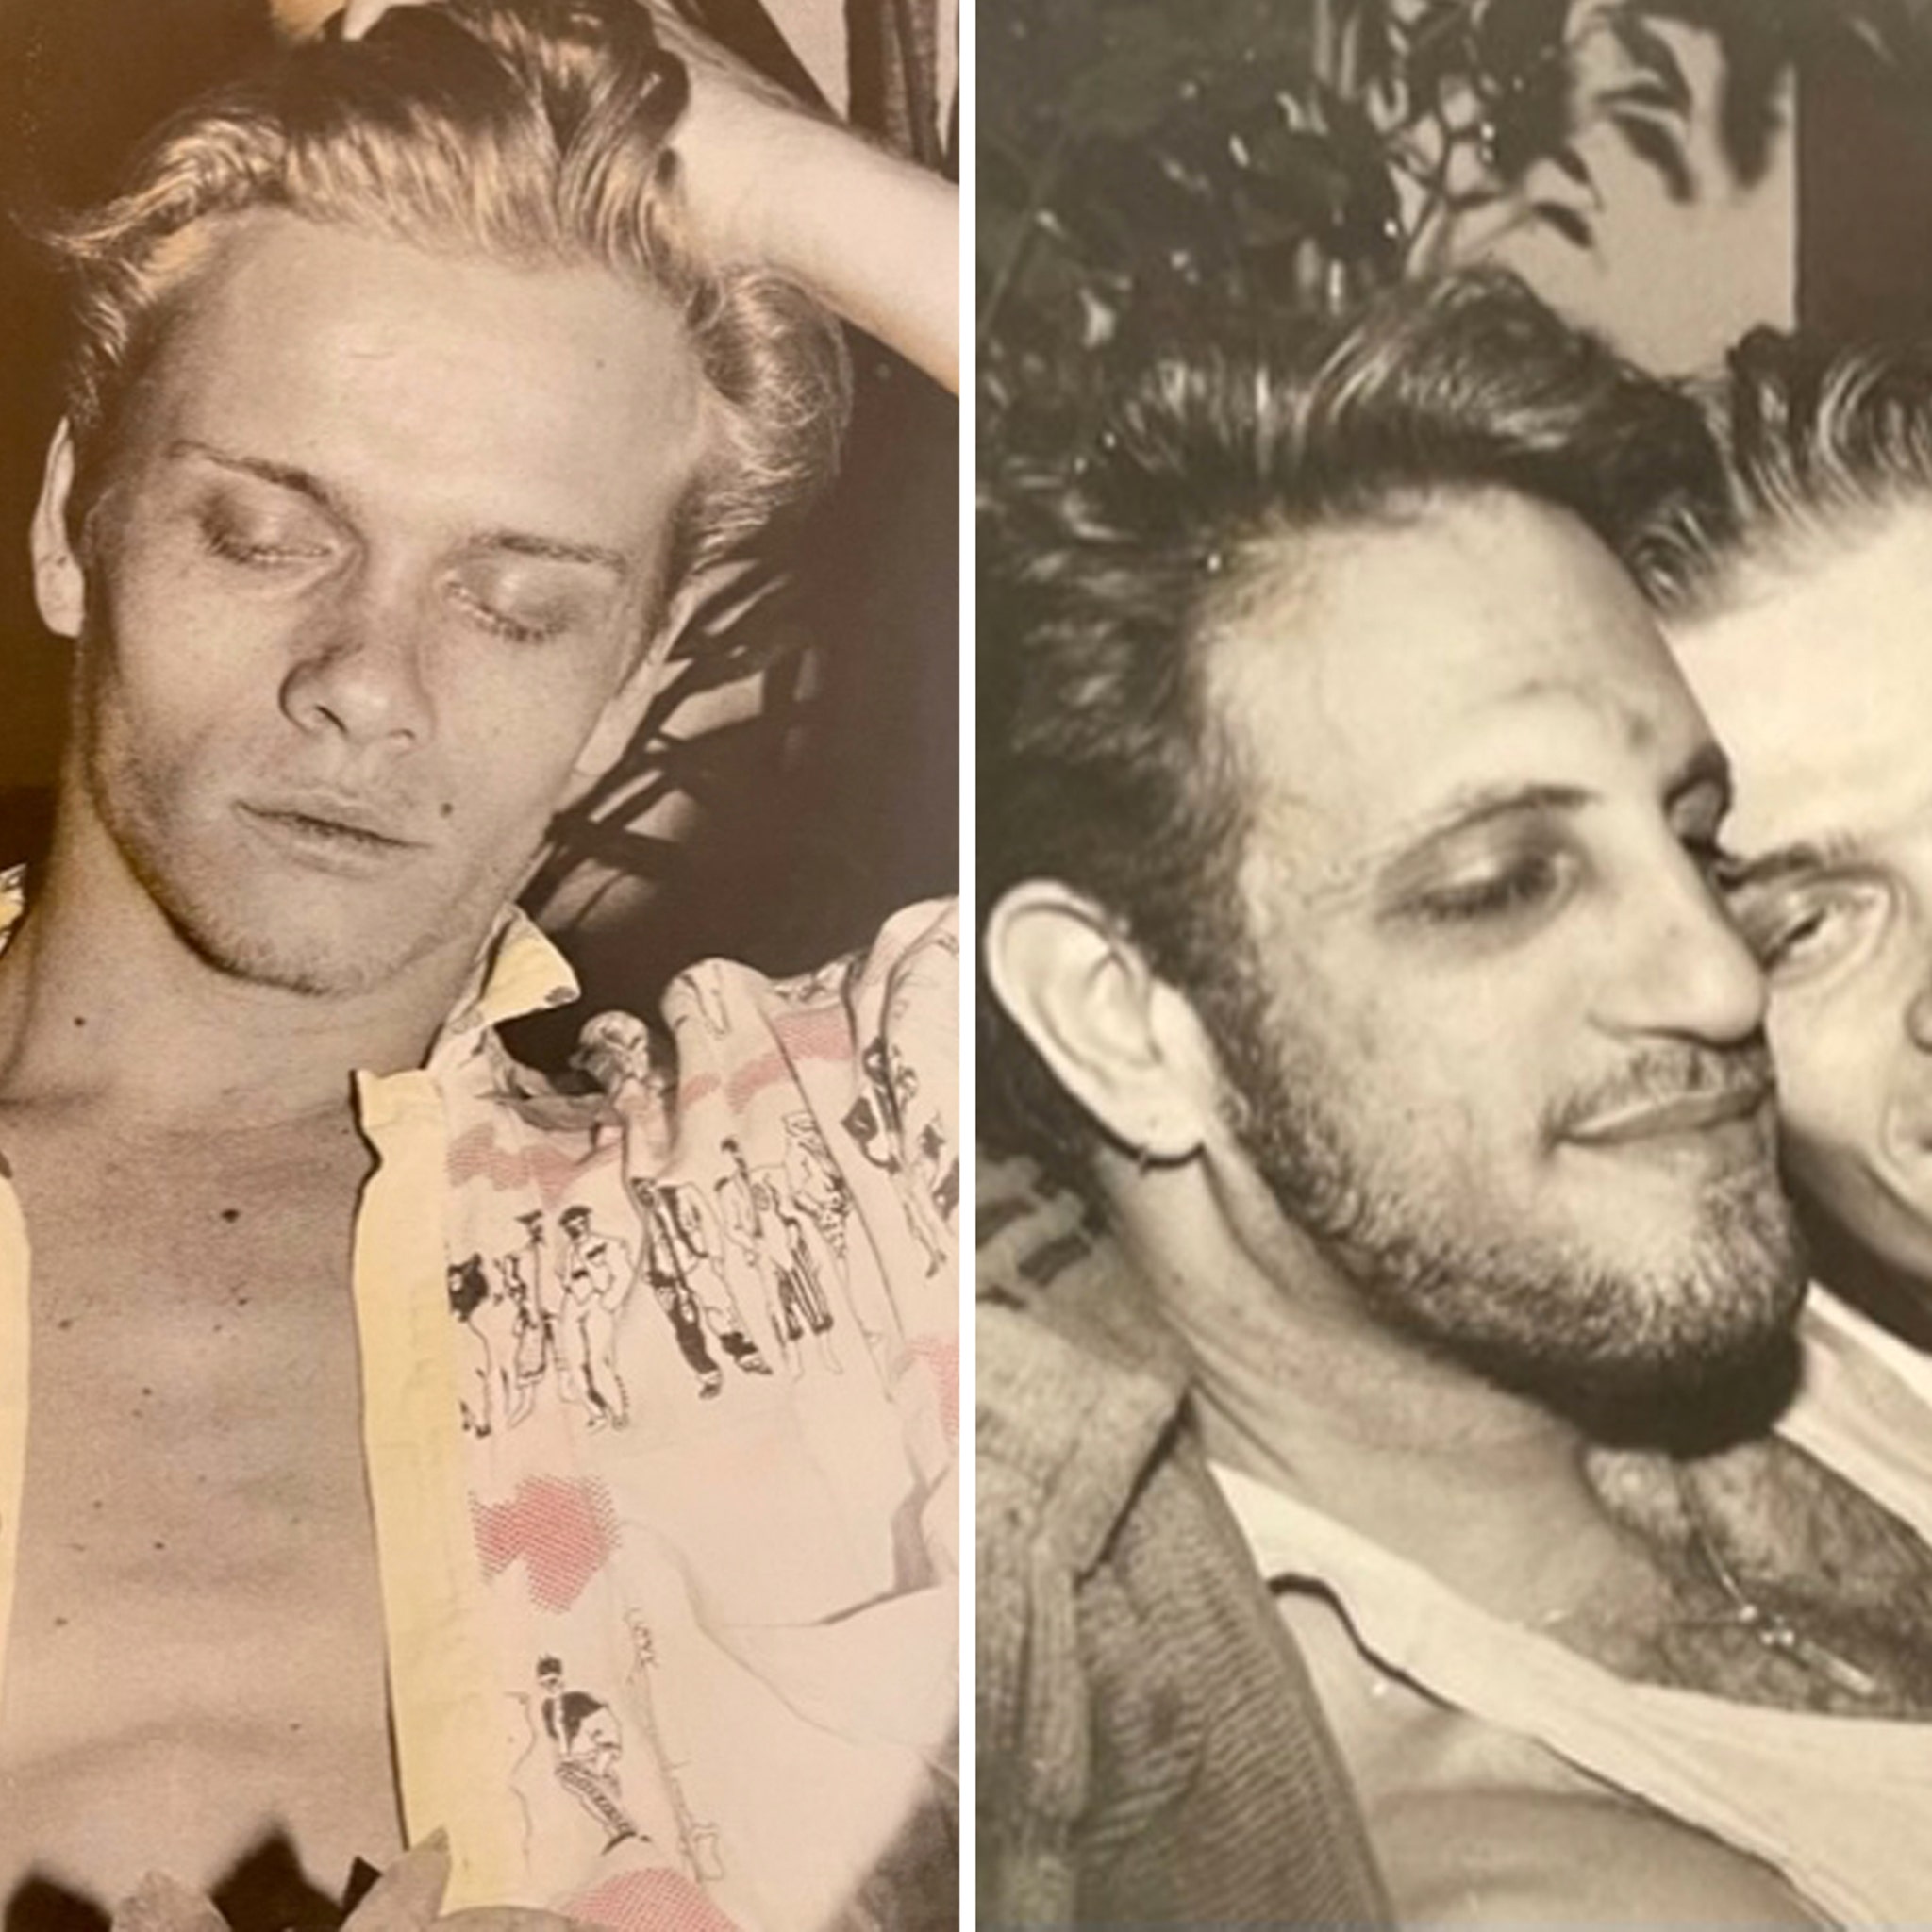 Gay Porn Star Billy Newtons Brutal Murder Solved Thanks to Amateur Sleuths 32 Years Later pic